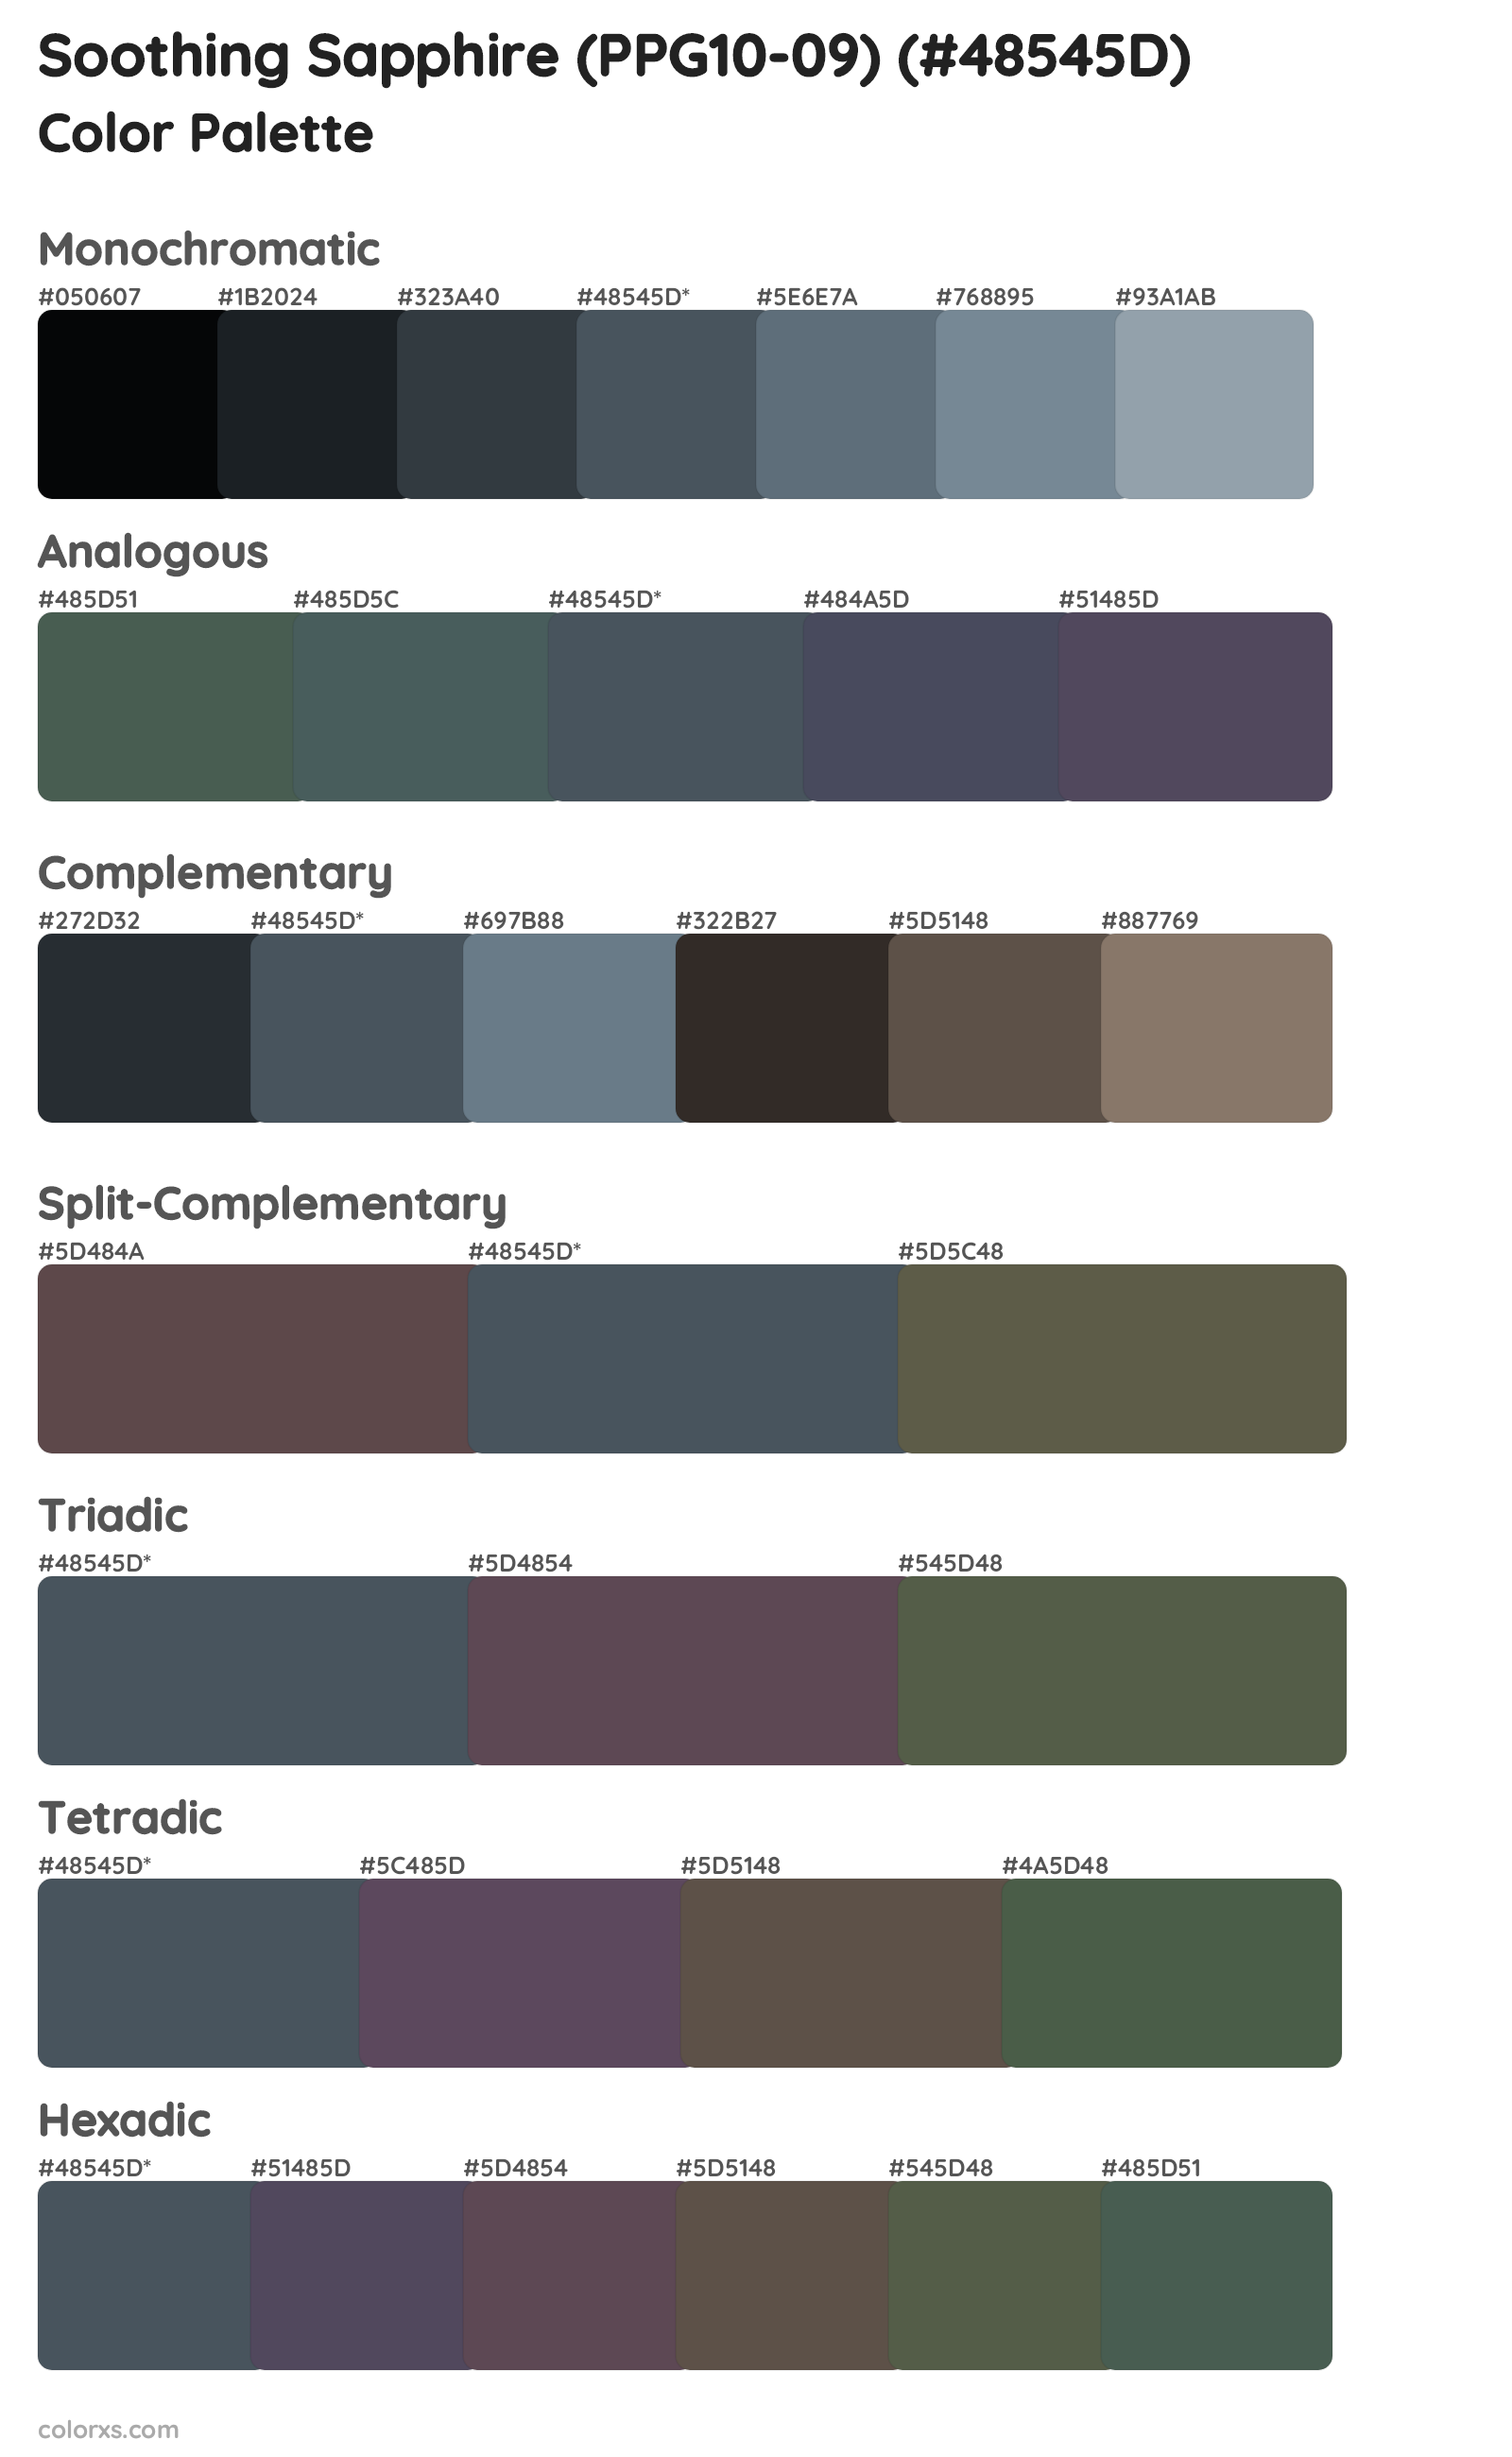 Soothing Sapphire (PPG10-09) Color Scheme Palettes